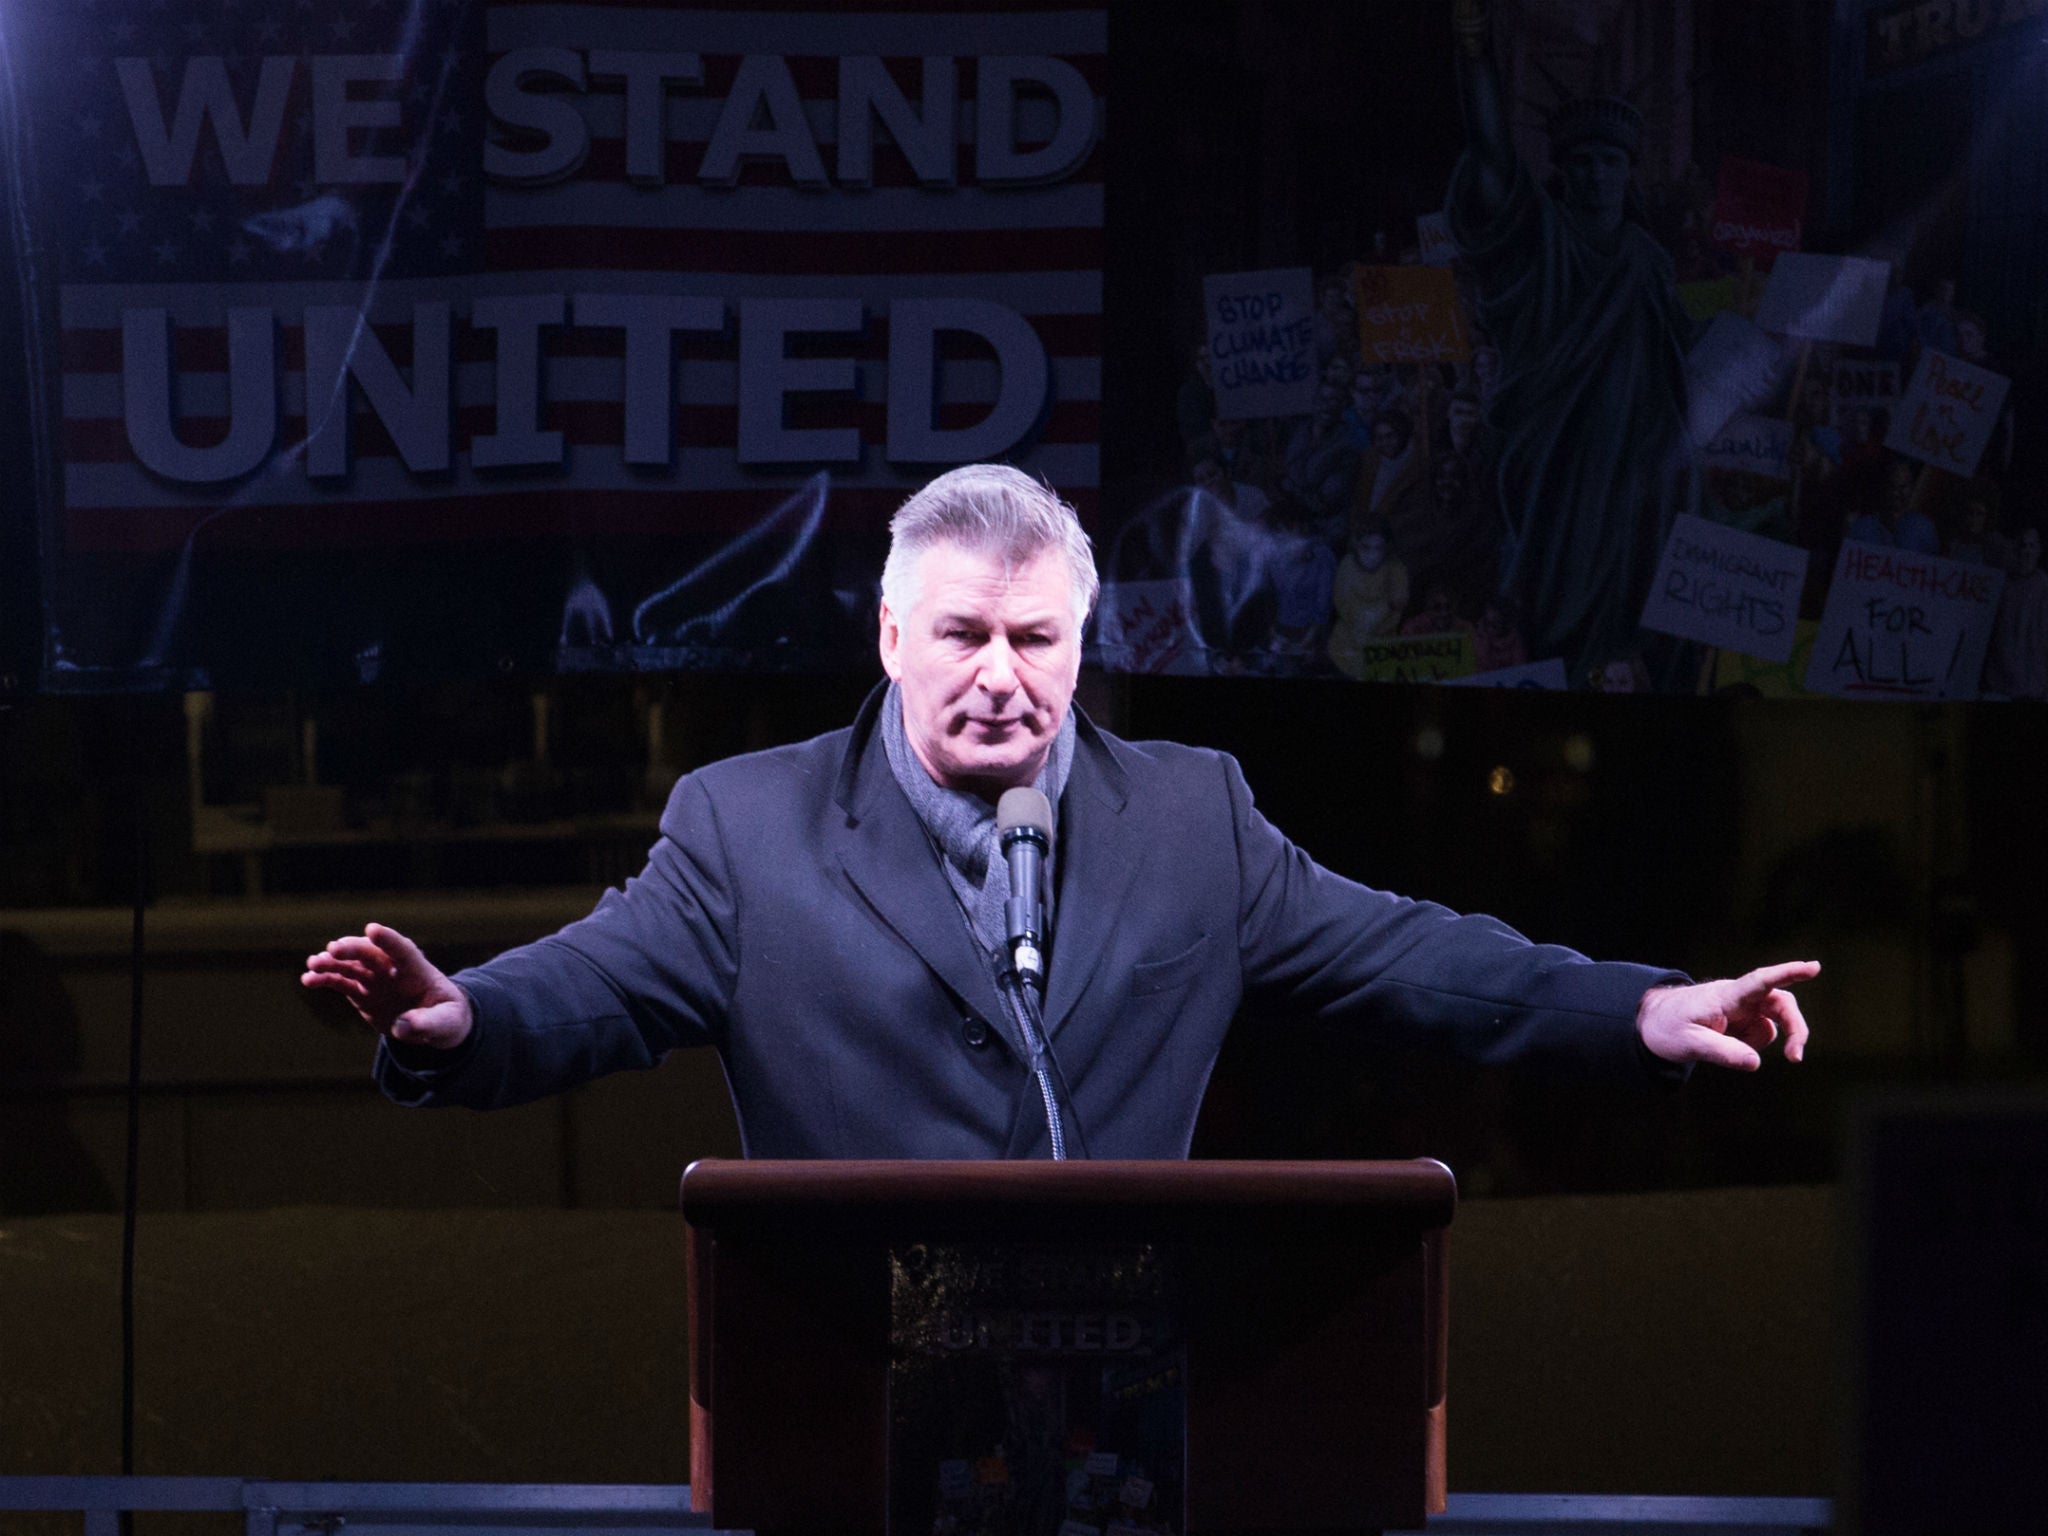 Alec Baldwin speaks during an anti-Trump rally in New York City on the eve of Donald Trump's inauguration